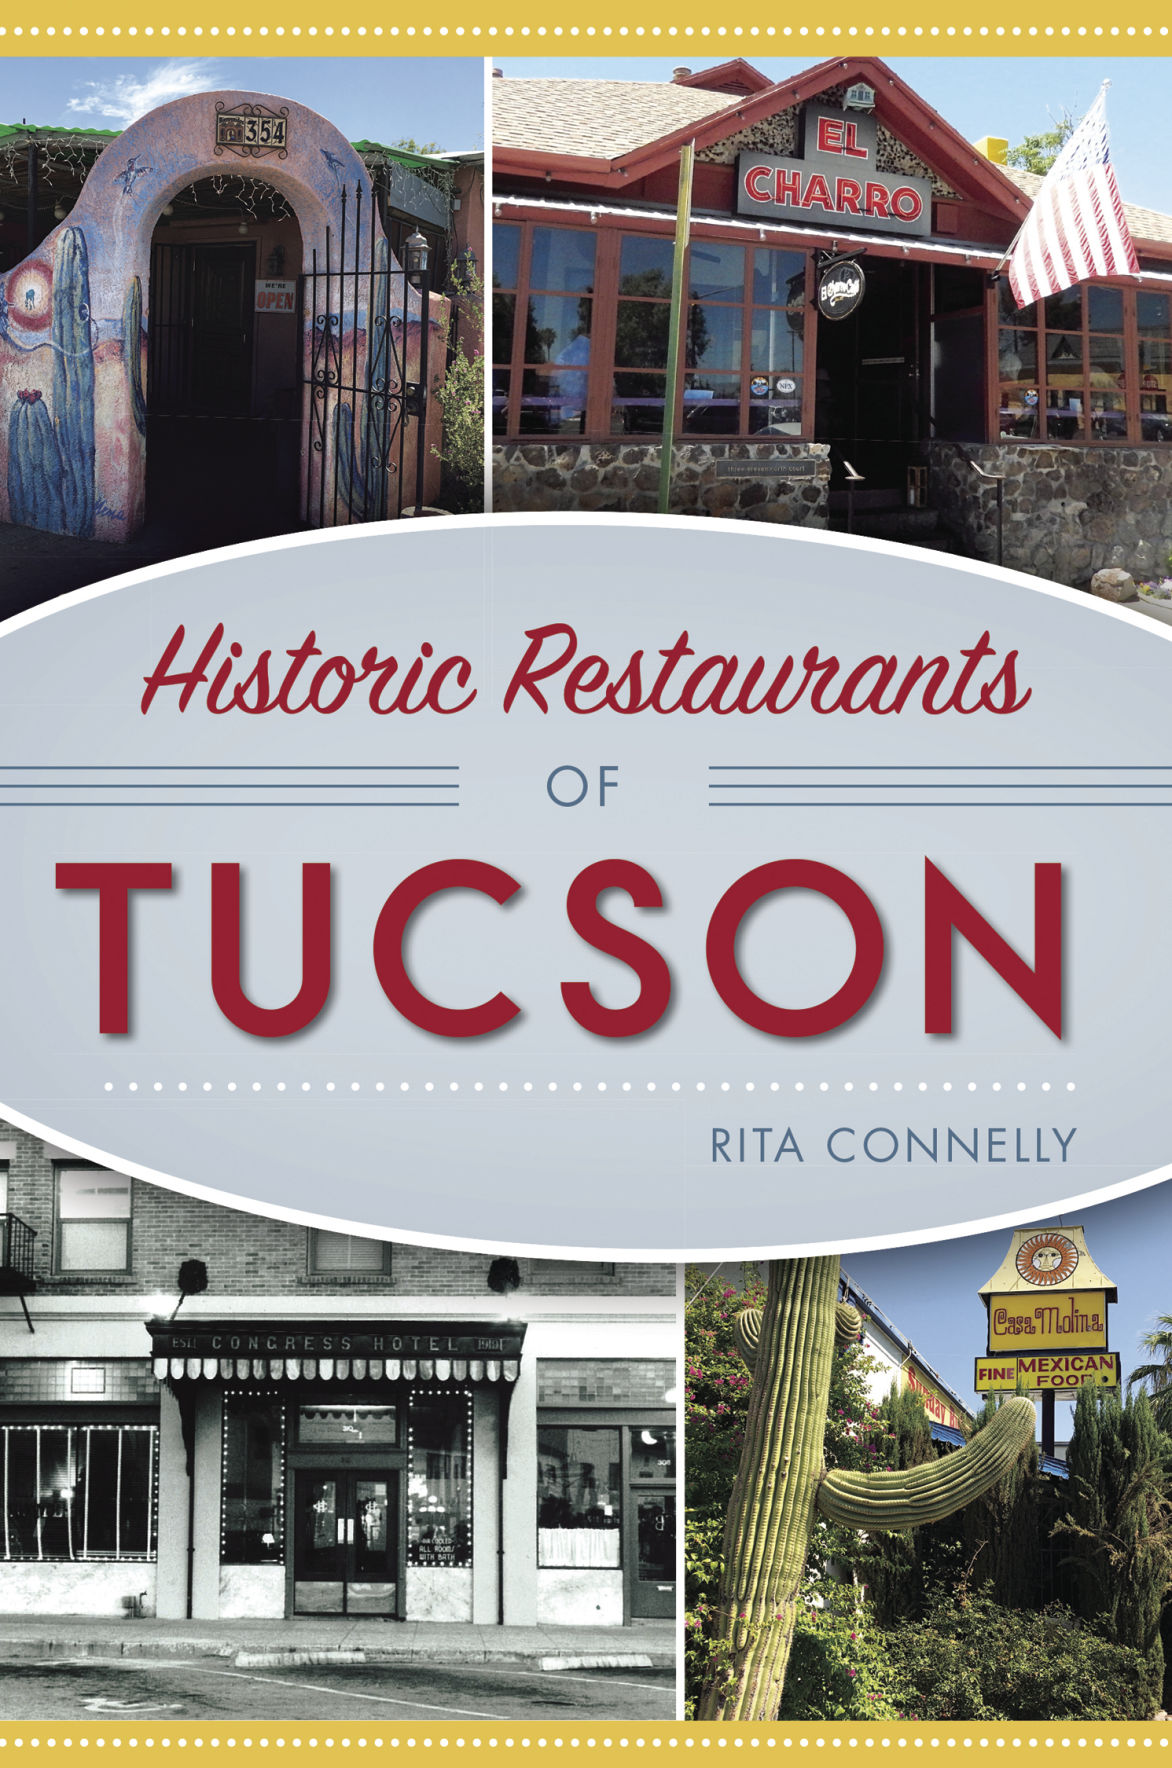 This new book looks at iconic Tucson restaurants that are still around